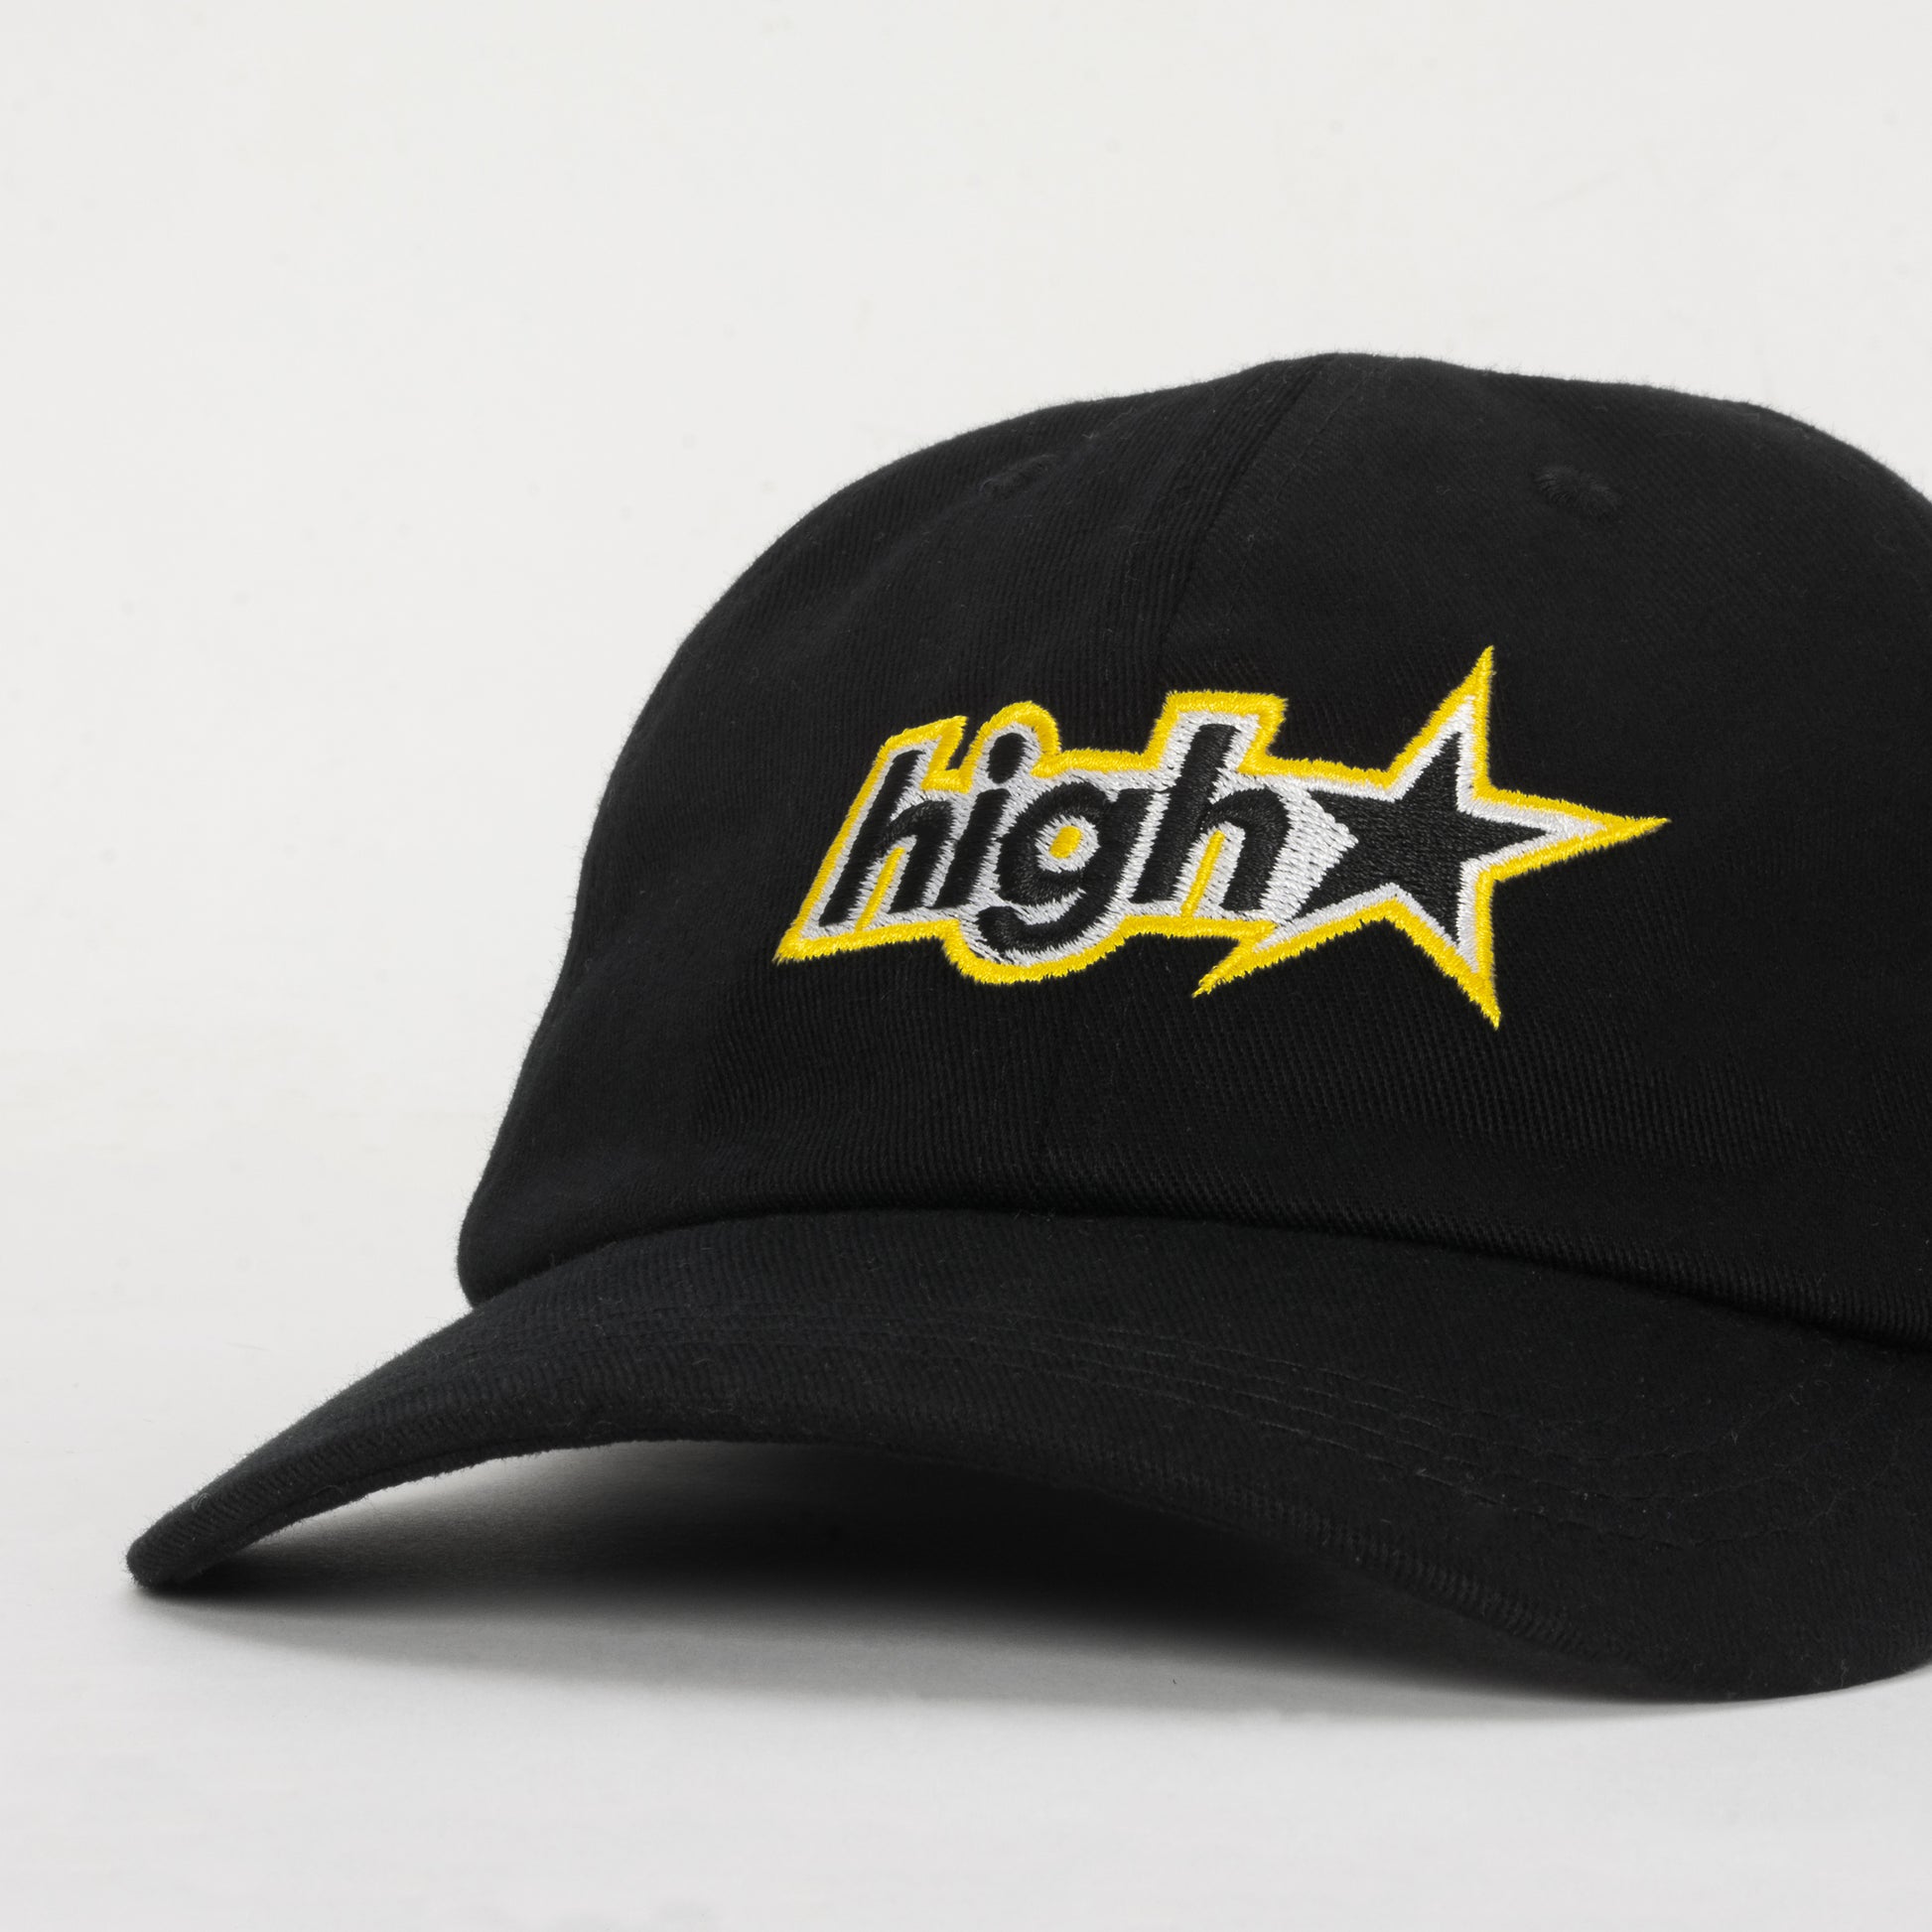 HIGH - Polo Hat Highstar "Black" - THE GAME